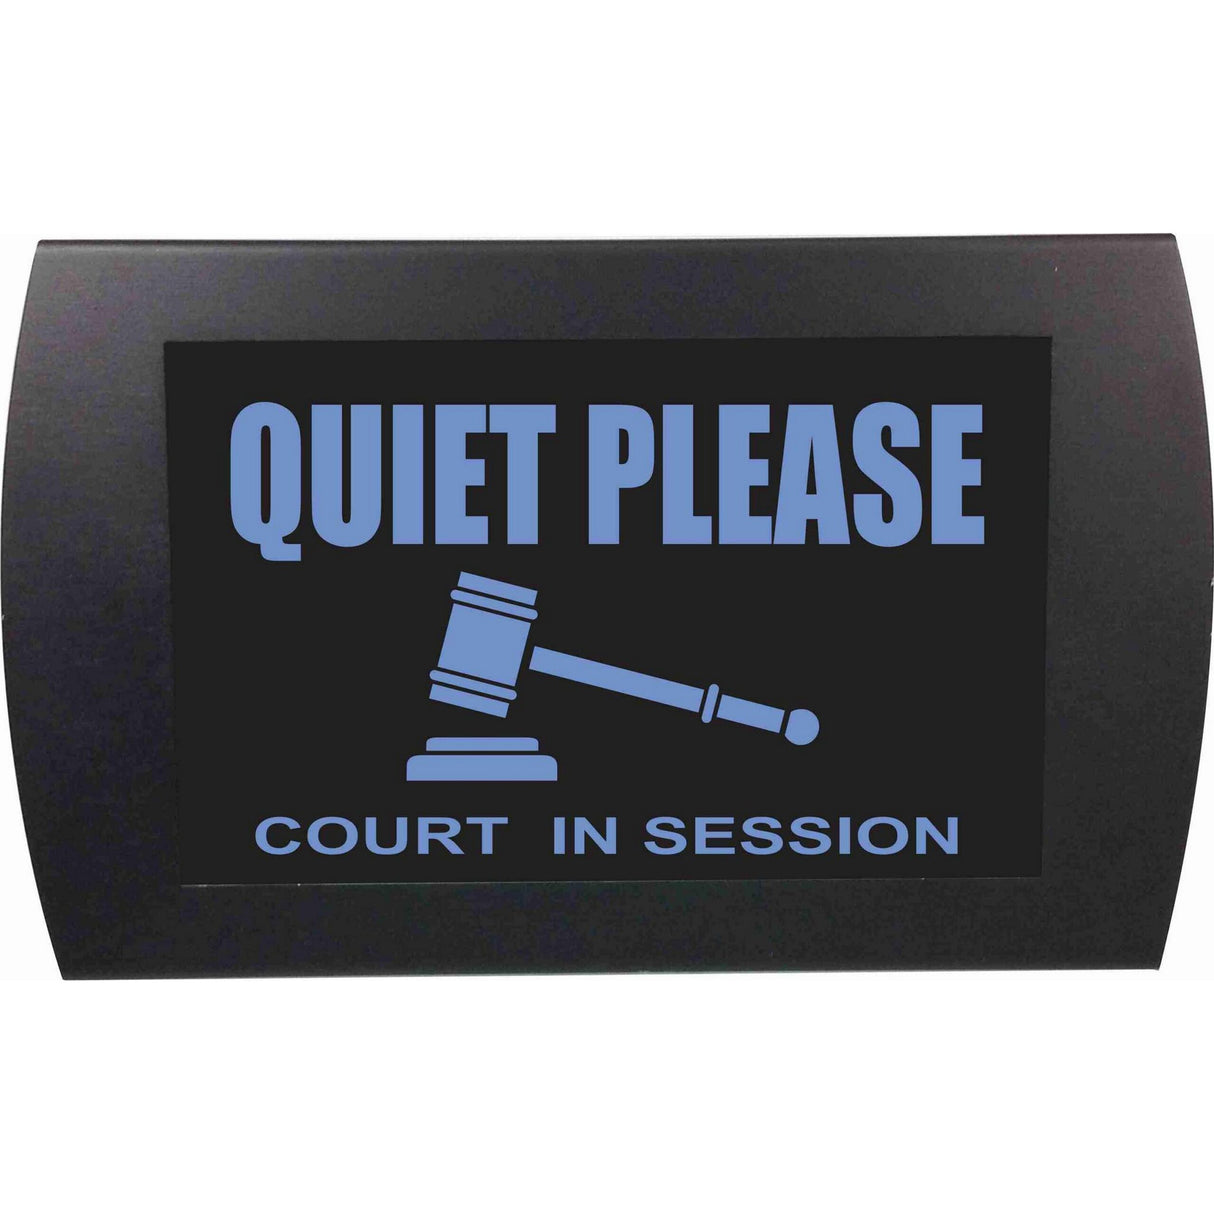 American Recorder OAS-2009M-BL "QUIET PLEASE - COURT IN SESSION" LED Lighted Sign, Blue